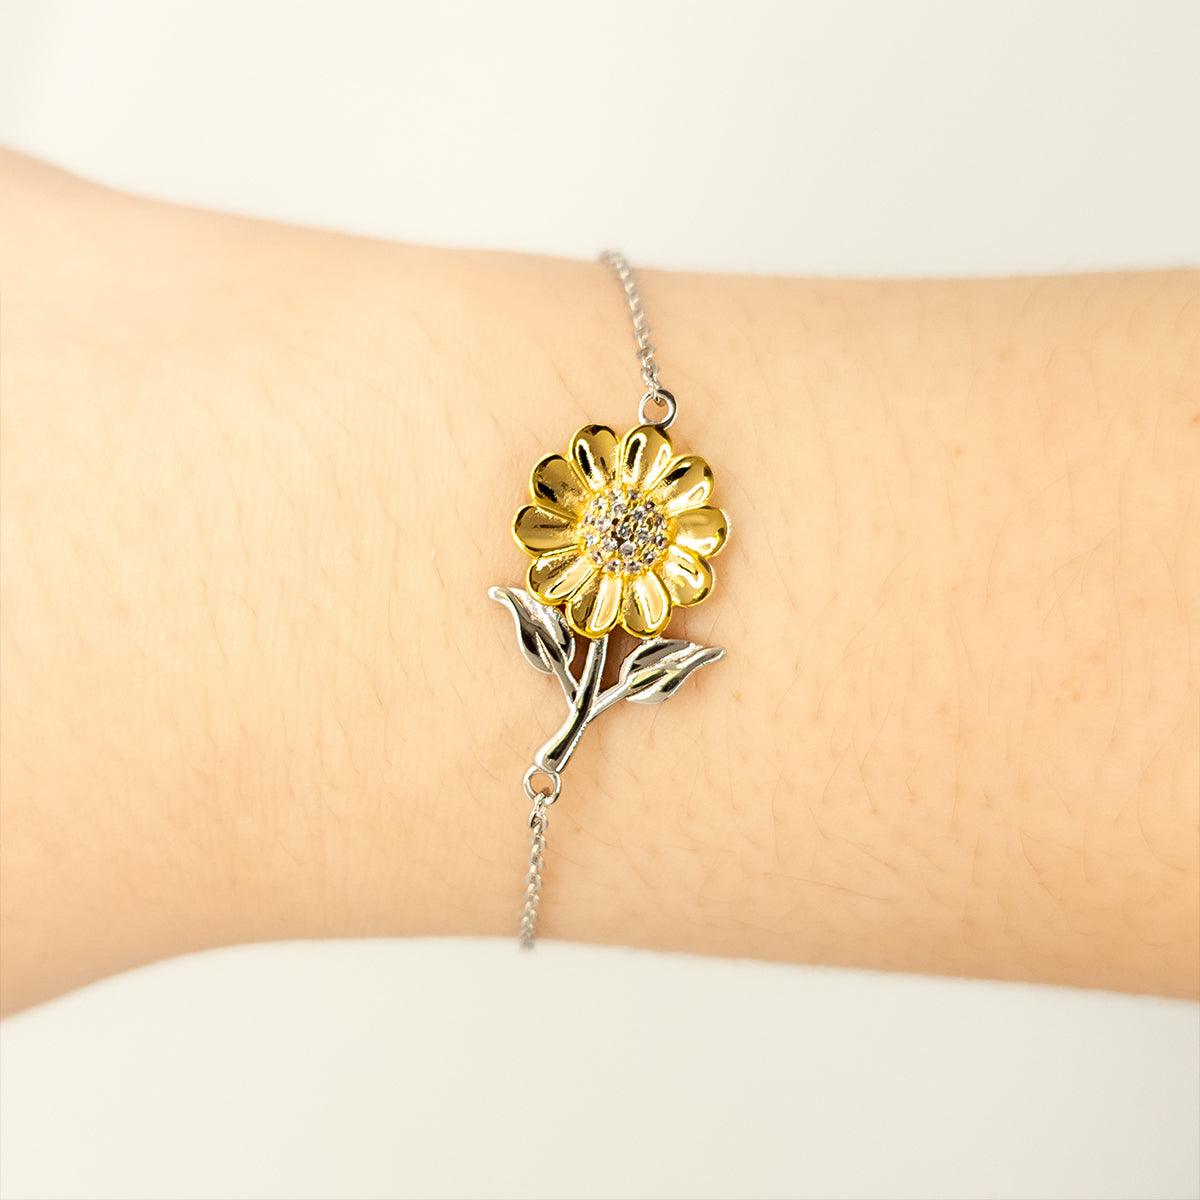 Cousin Christmas Perfect Gifts, Cousin Sunflower Bracelet, Motivational Cousin Message Card Gifts, Birthday Gifts For Cousin, To My Cousin Life is learning to dance in the rain, finding good in each day. I'm always with you - Mallard Moon Gift Shop